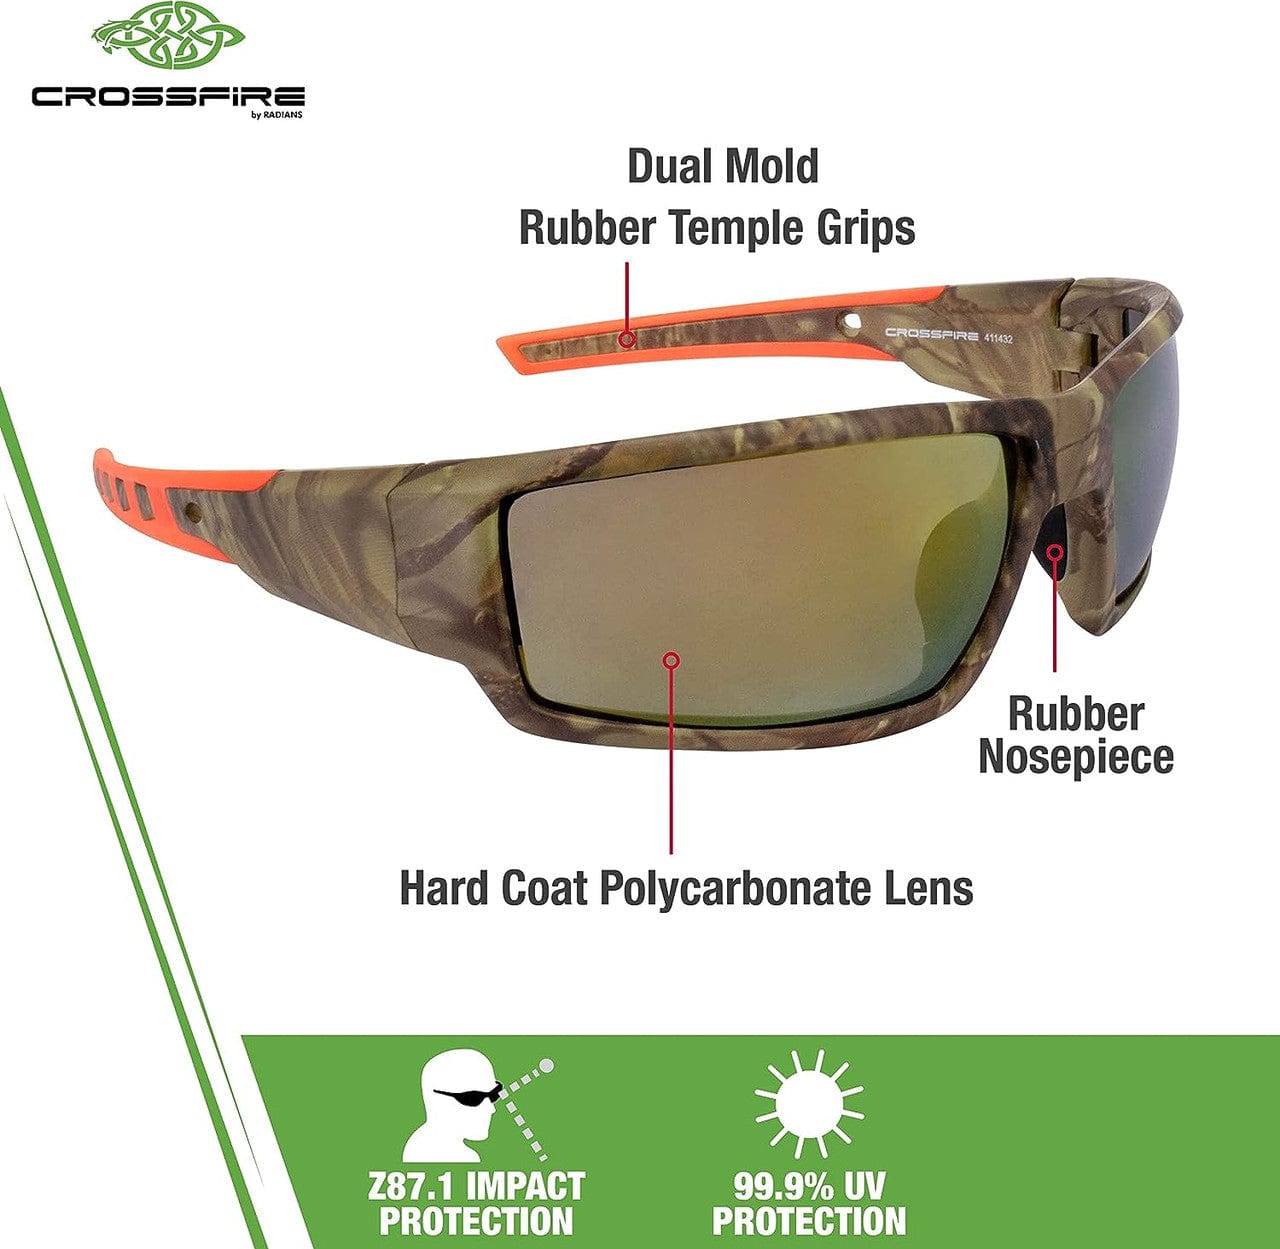 Crossfire Cumulus 411432 Safety Glasses Key Features